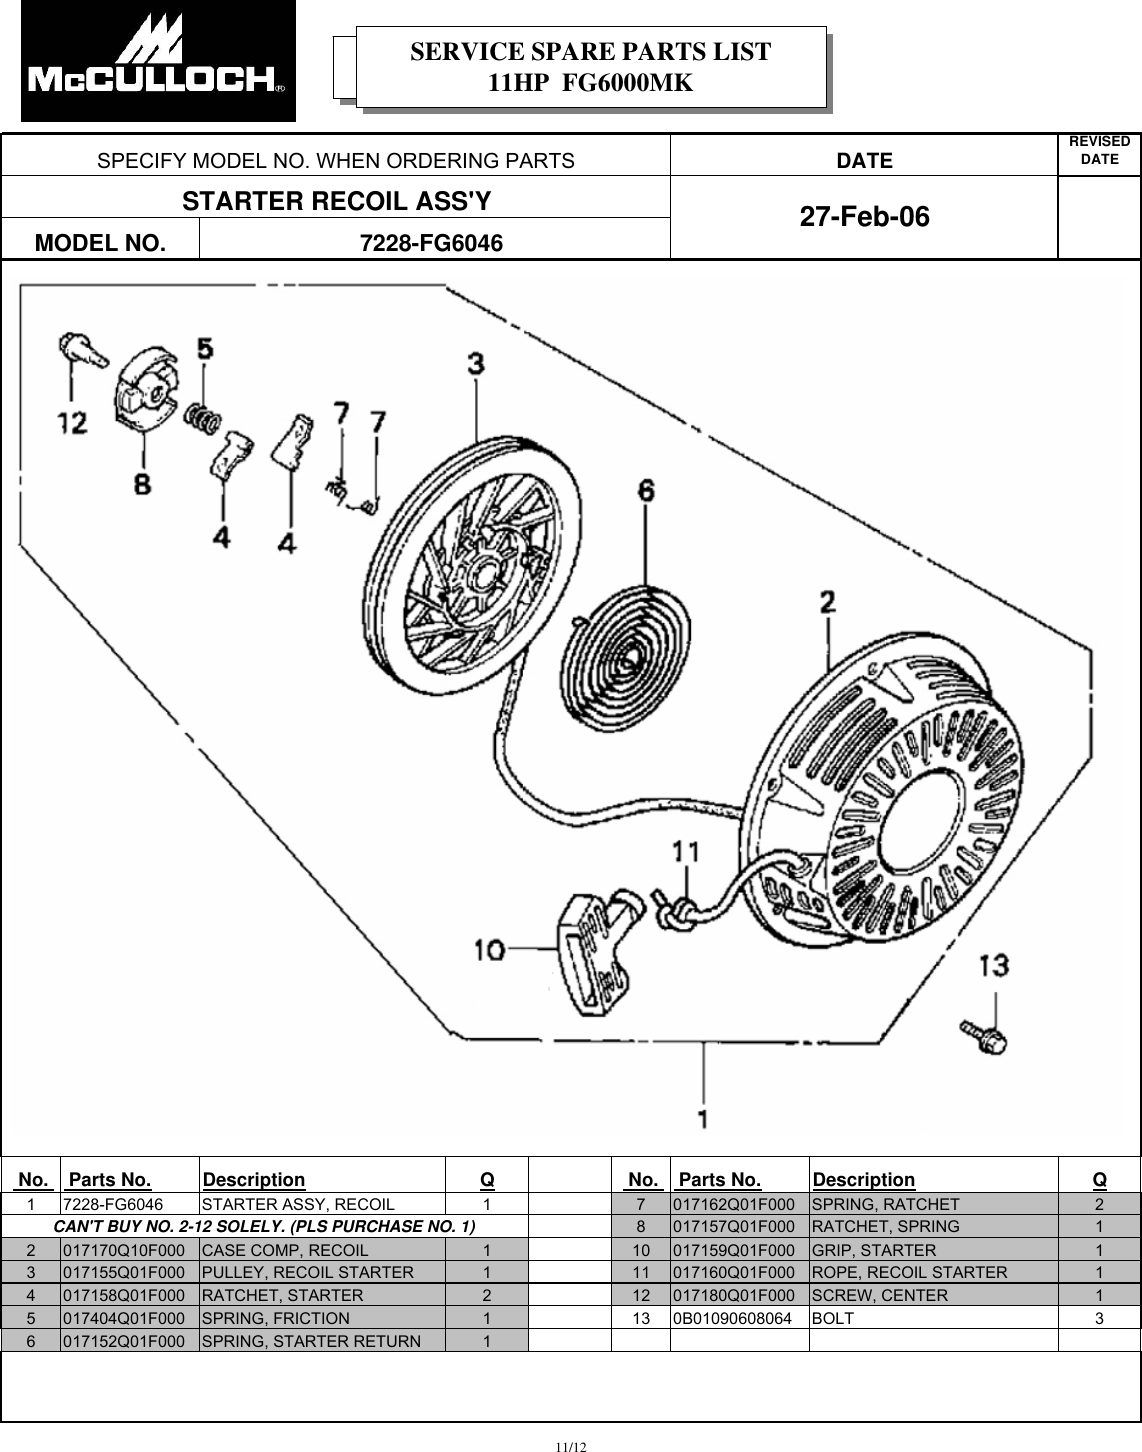 Page 11 of 12 - Mcculloch Mcculloch-Fg6000Mkud-C-Parts-List- IPL, McCulloch, FG6000MK, 2008-06, 7096FG6024, 966991401, US  Mcculloch-fg6000mkud-c-parts-list